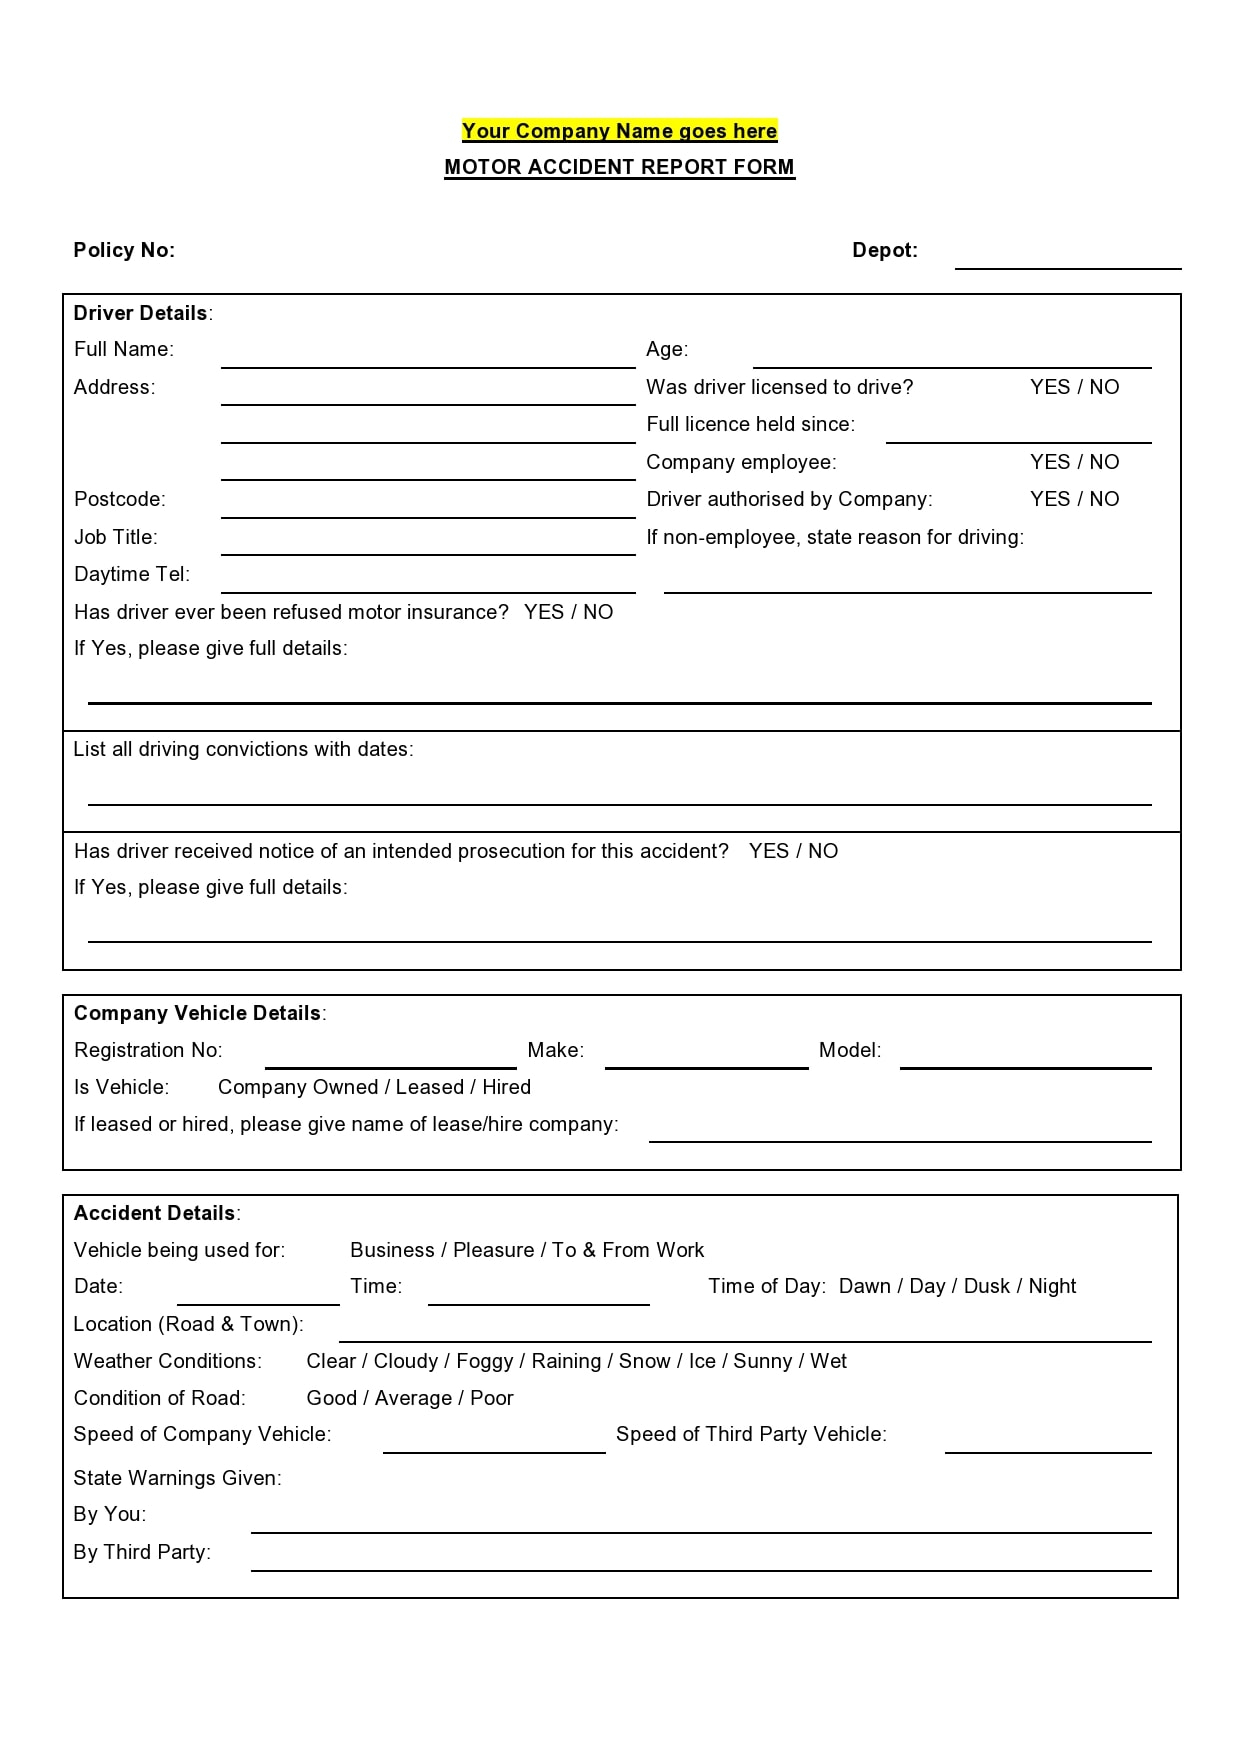 10 Accident Report Forms (Car, Work Injury, more) - TemplateArchive With Vehicle Accident Report Form Template